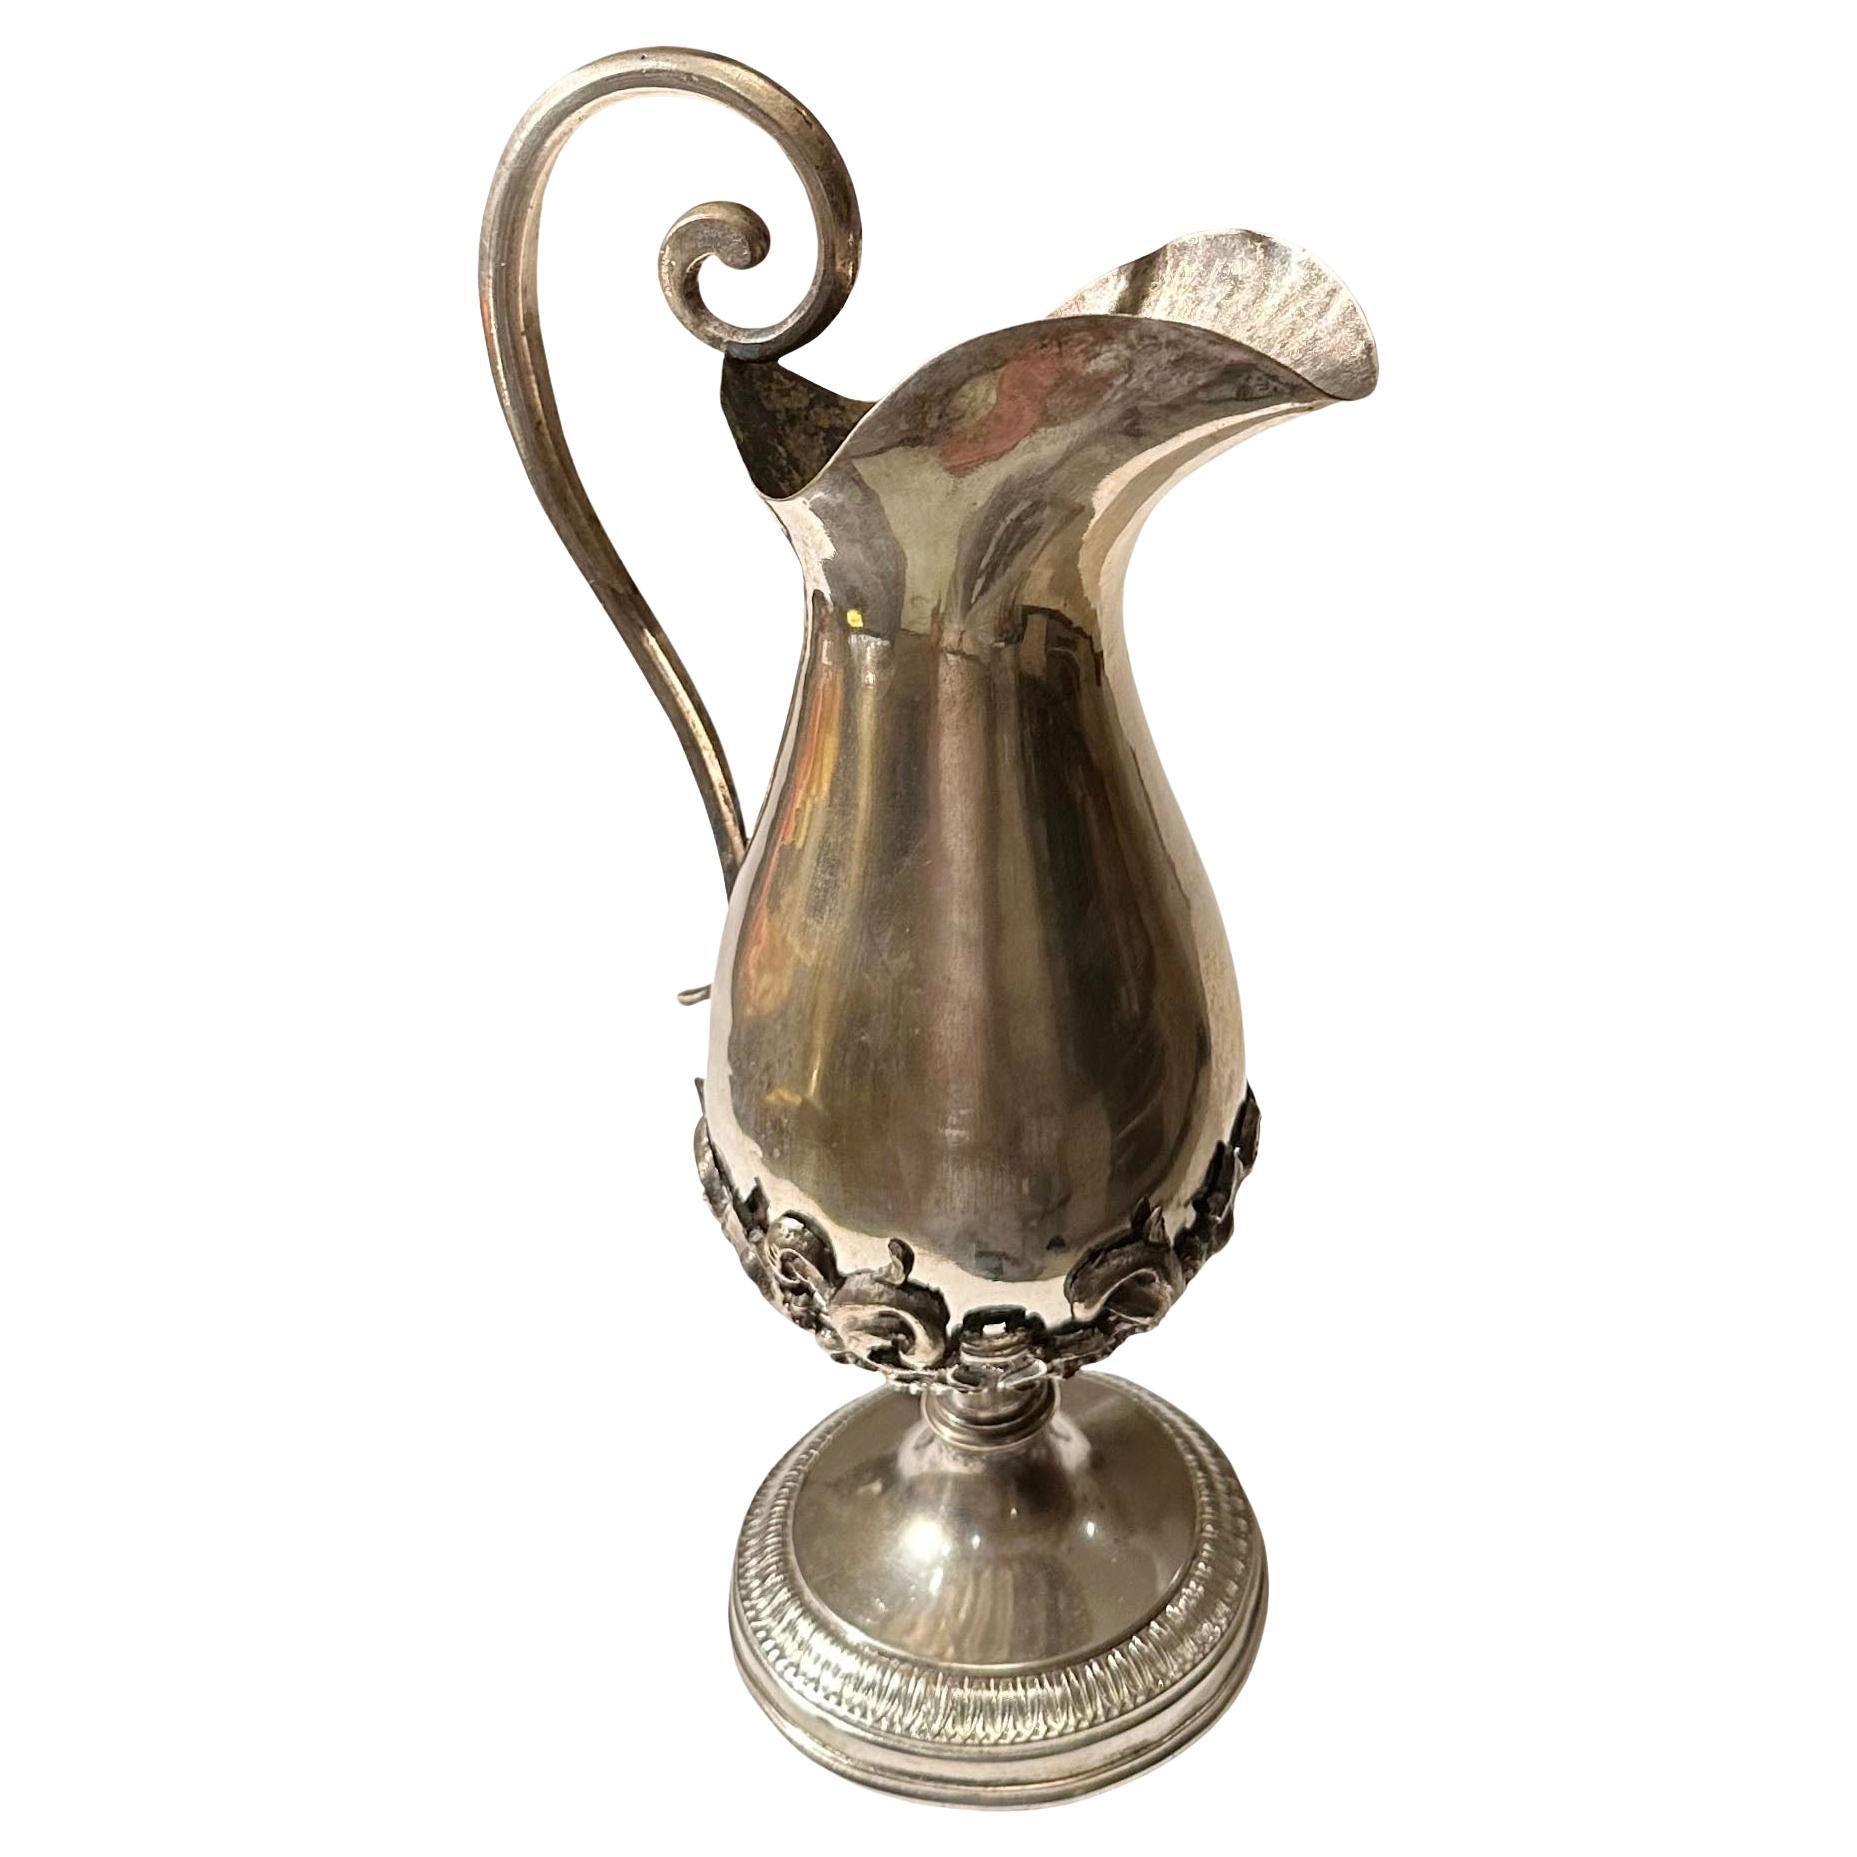 Antique Silver Plated Pitcher